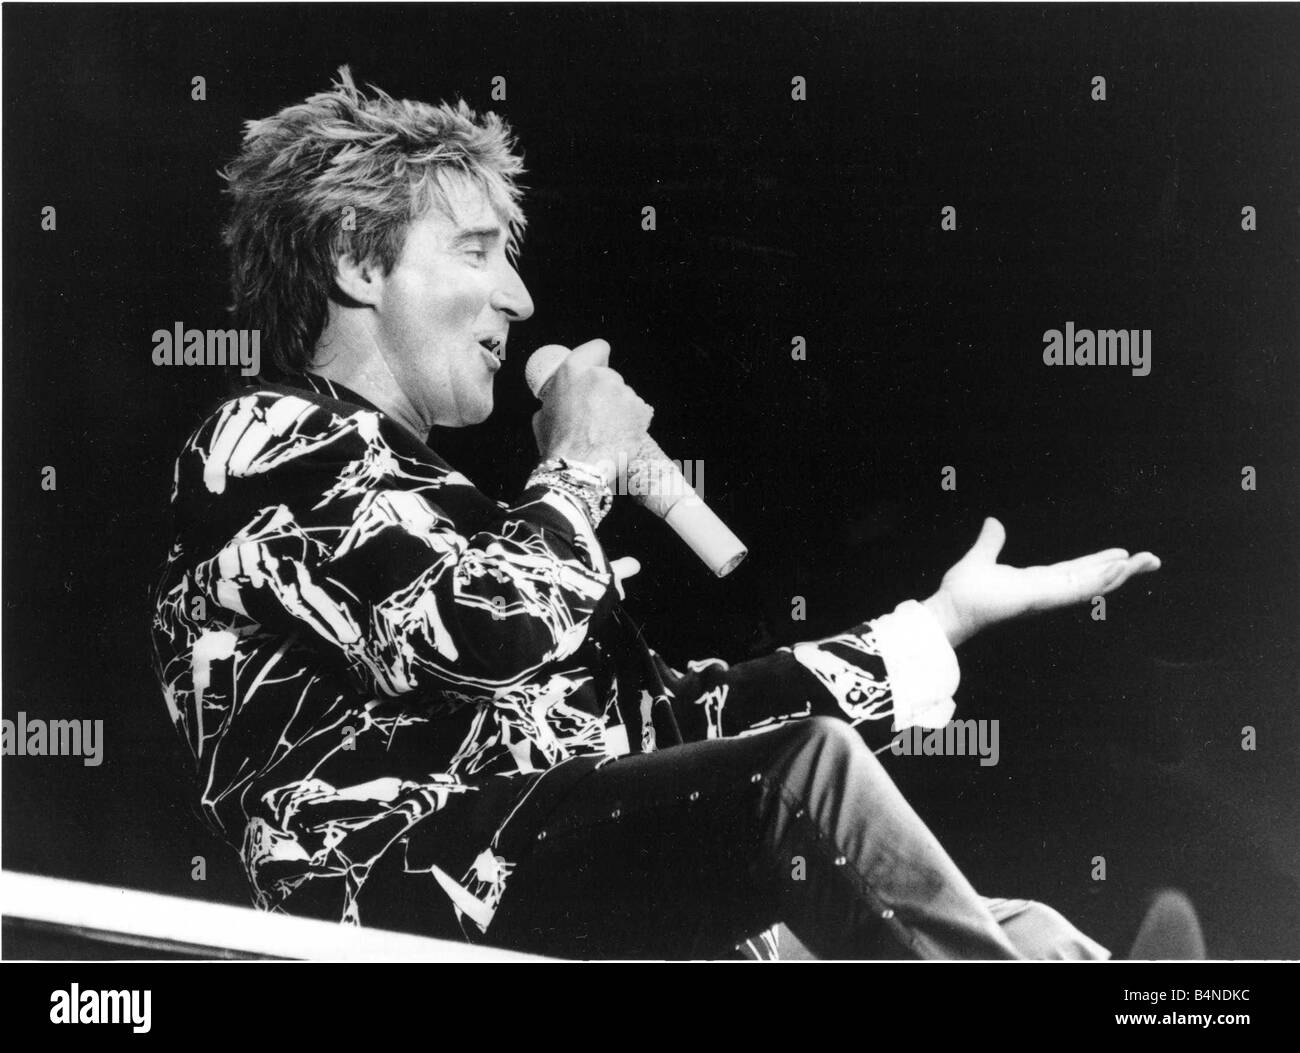 Veteran Rocker Rod Stewart went down a storn at Wembley Stadium on 15 July 1986 and so did the rain Rod sang to a sea of umbrellas during an emotional reunion with his old backing band The Faces The band watched by 60 000 fans played together for the first time in 13 years The concert was staged to raise money for a new clinic for victims of multiple sclerosis the disease that struck down former Faces guitarist Ronnie Lane Local Caption retromusic Stock Photo